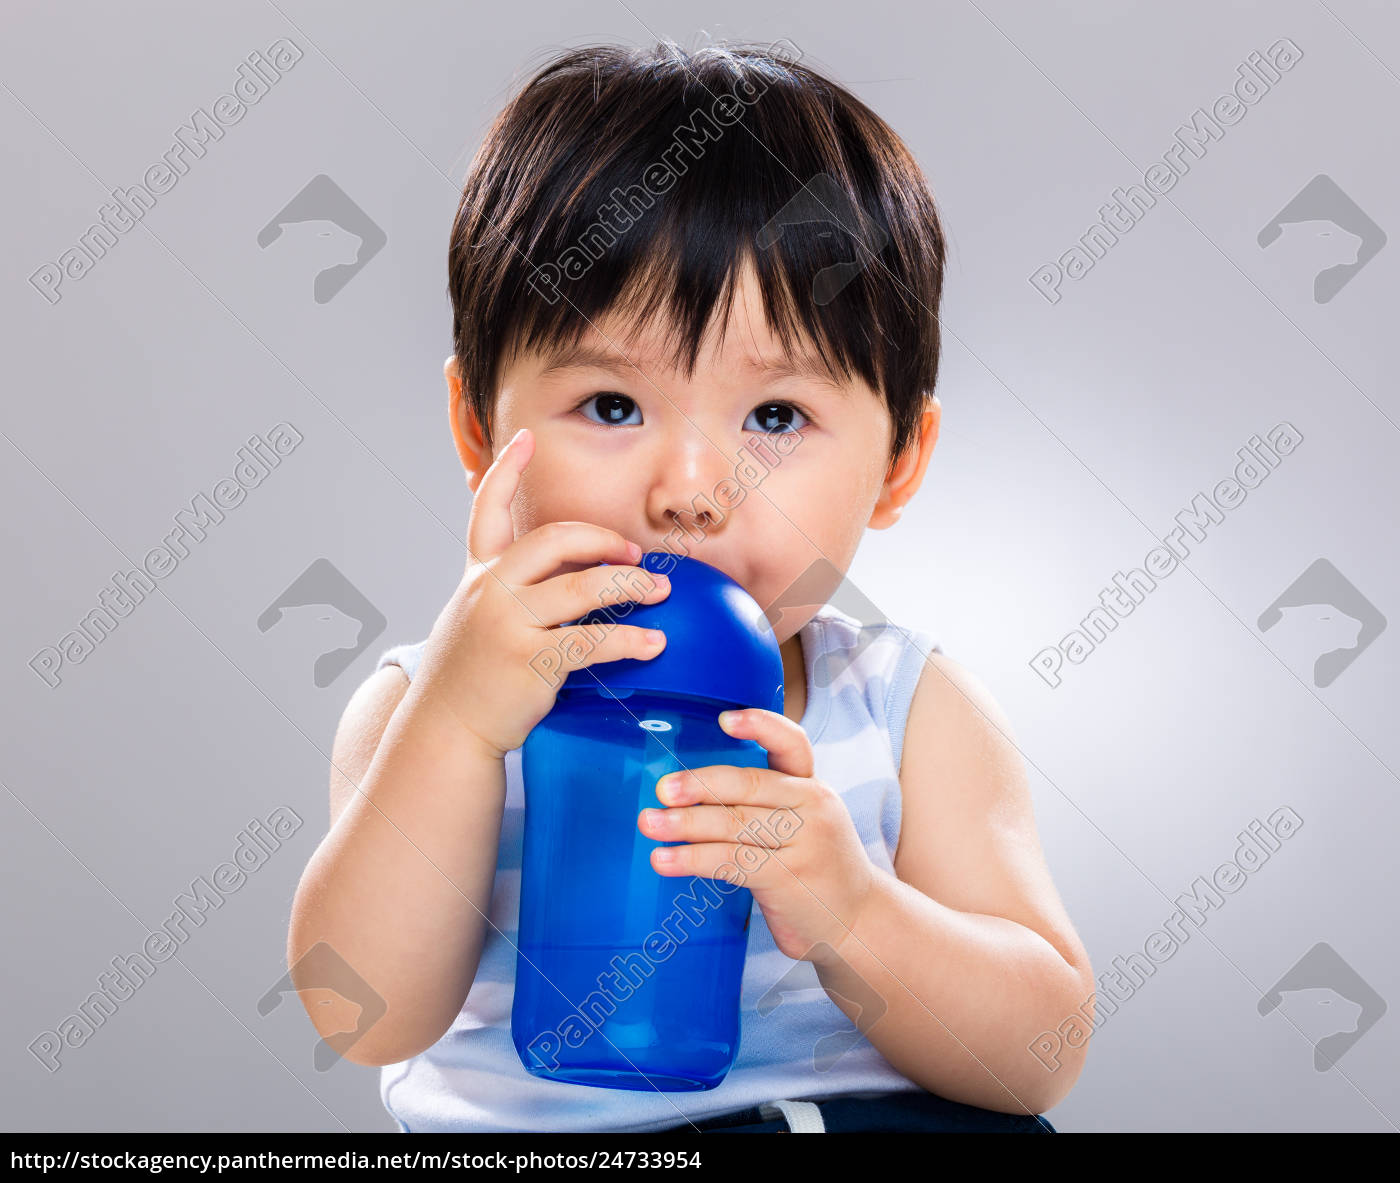 Baby boy drinking with water bottle - Stock image #24733954